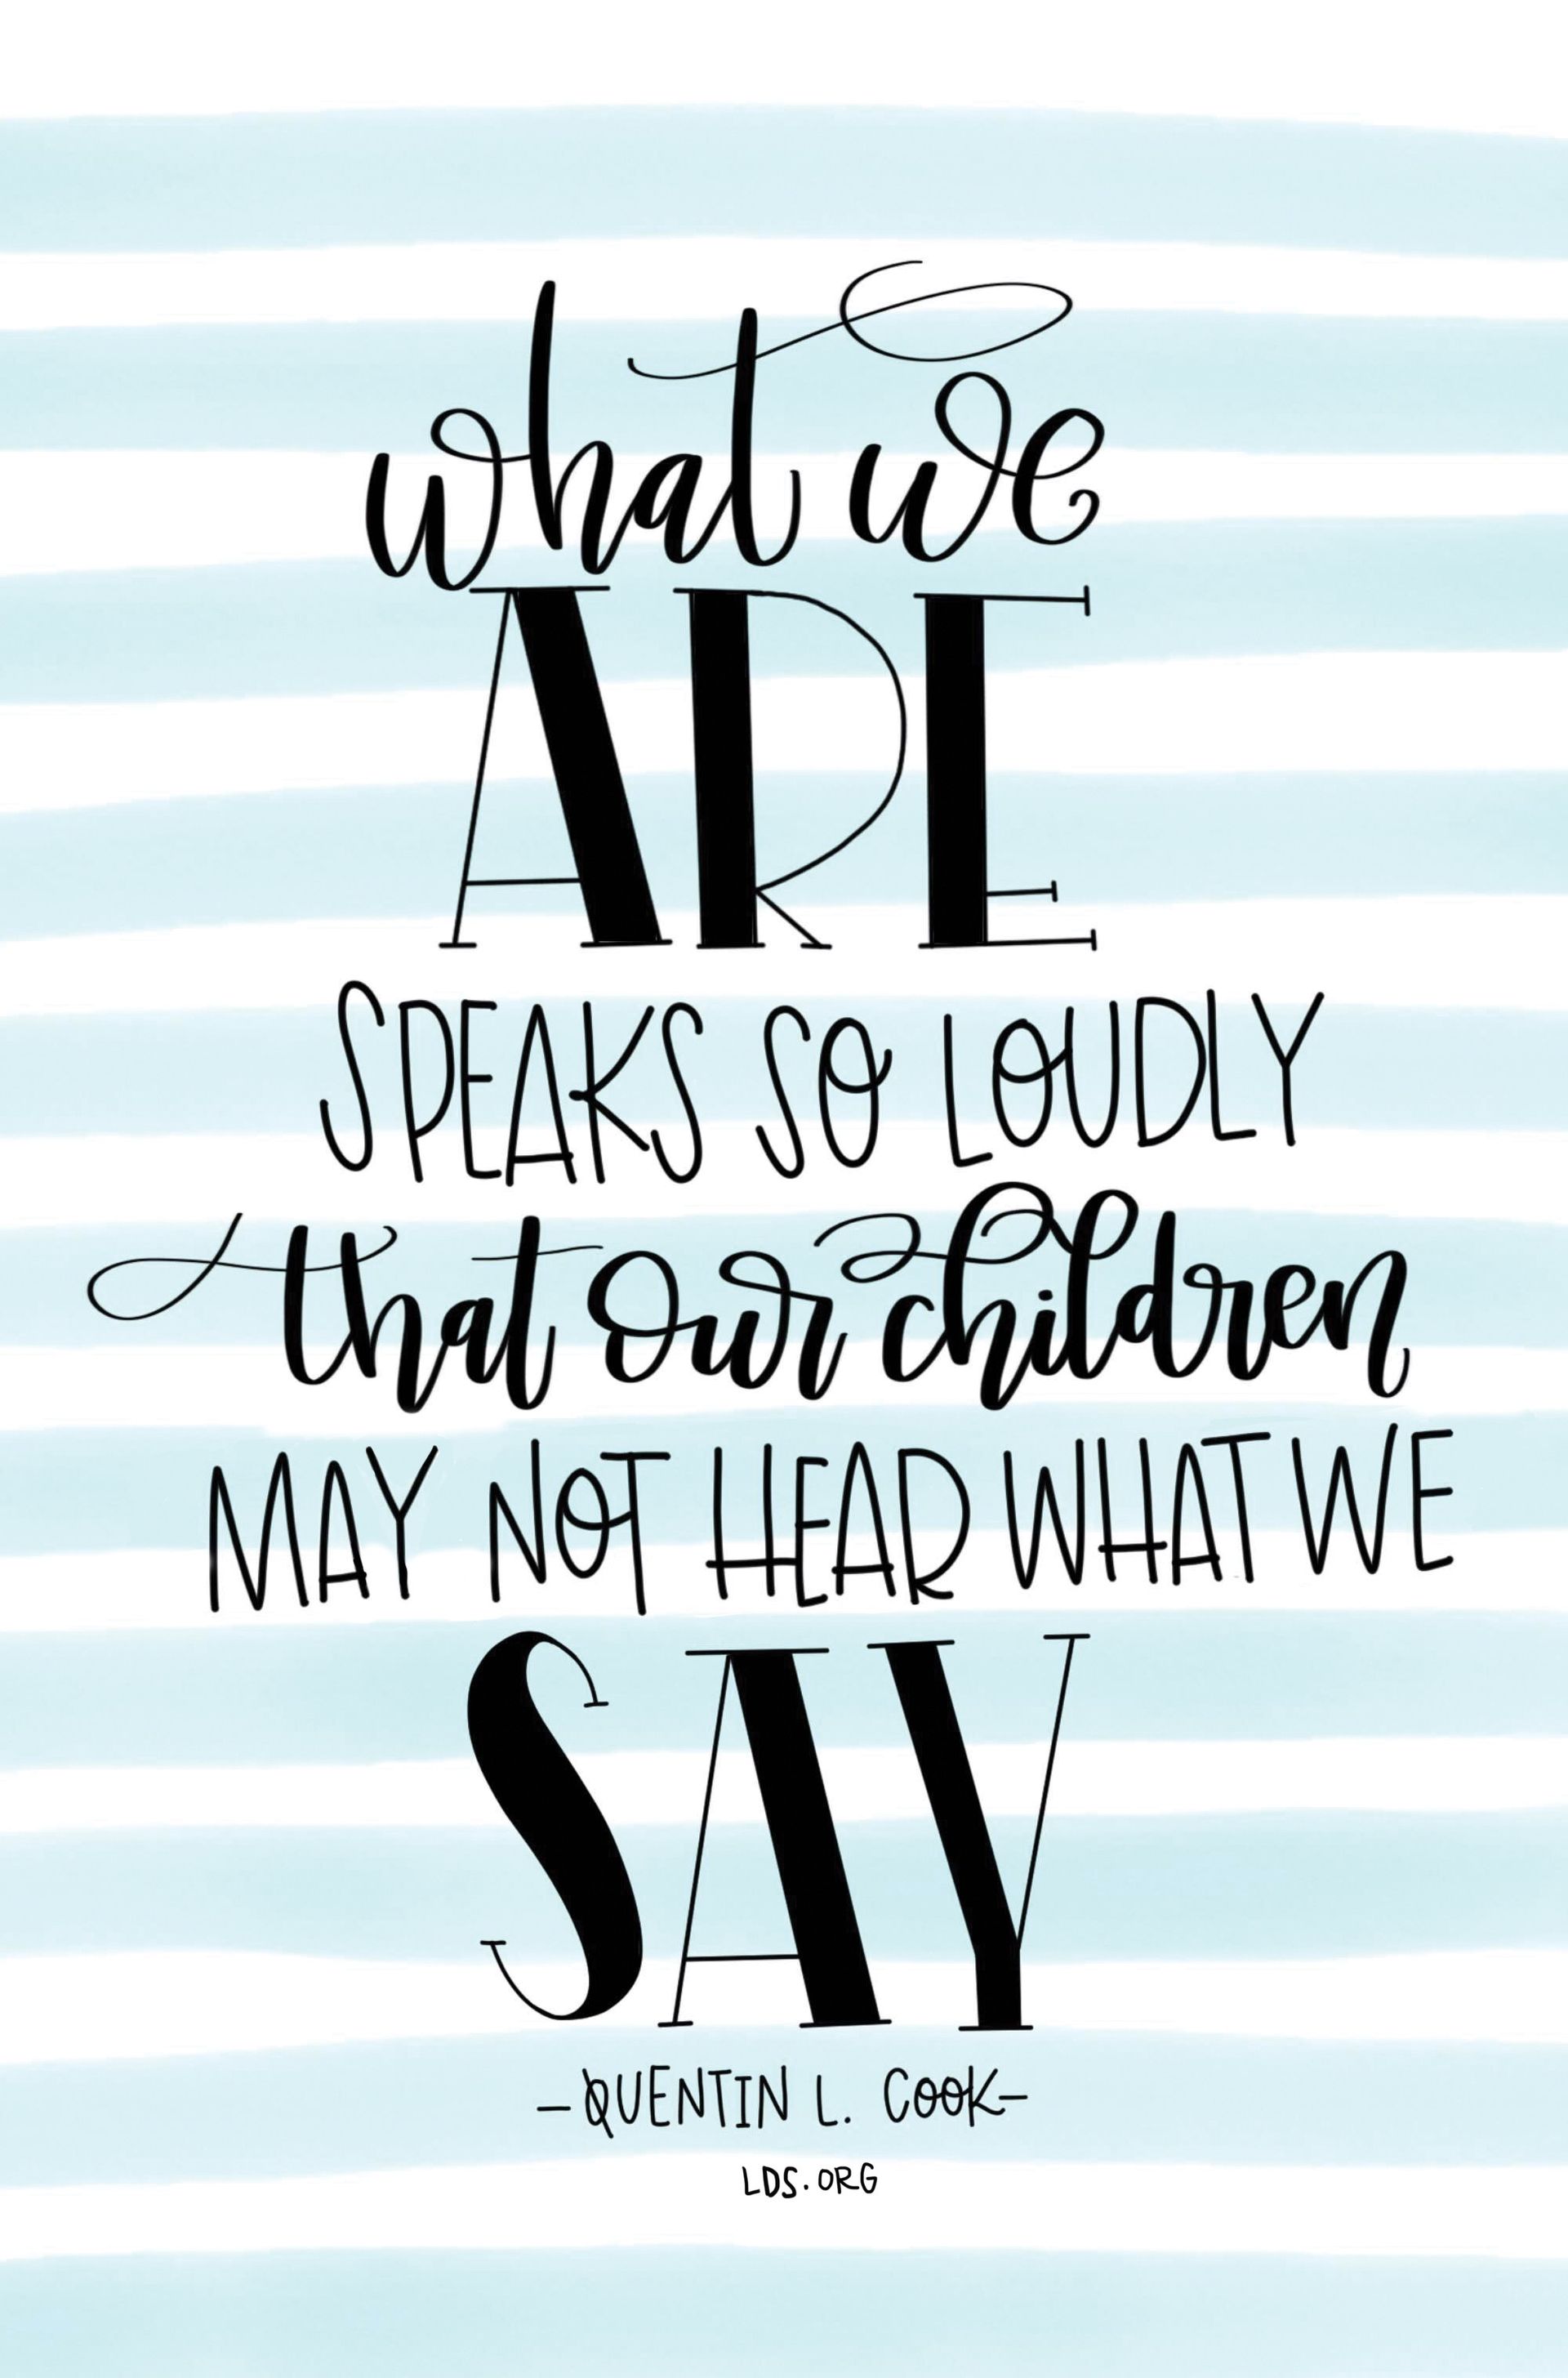 What we are speaks so loudly that our children may not hear what we say.—Elder Quentin L. Cook, "In Tune with the Music of Faith." Created by Emily Stanton.